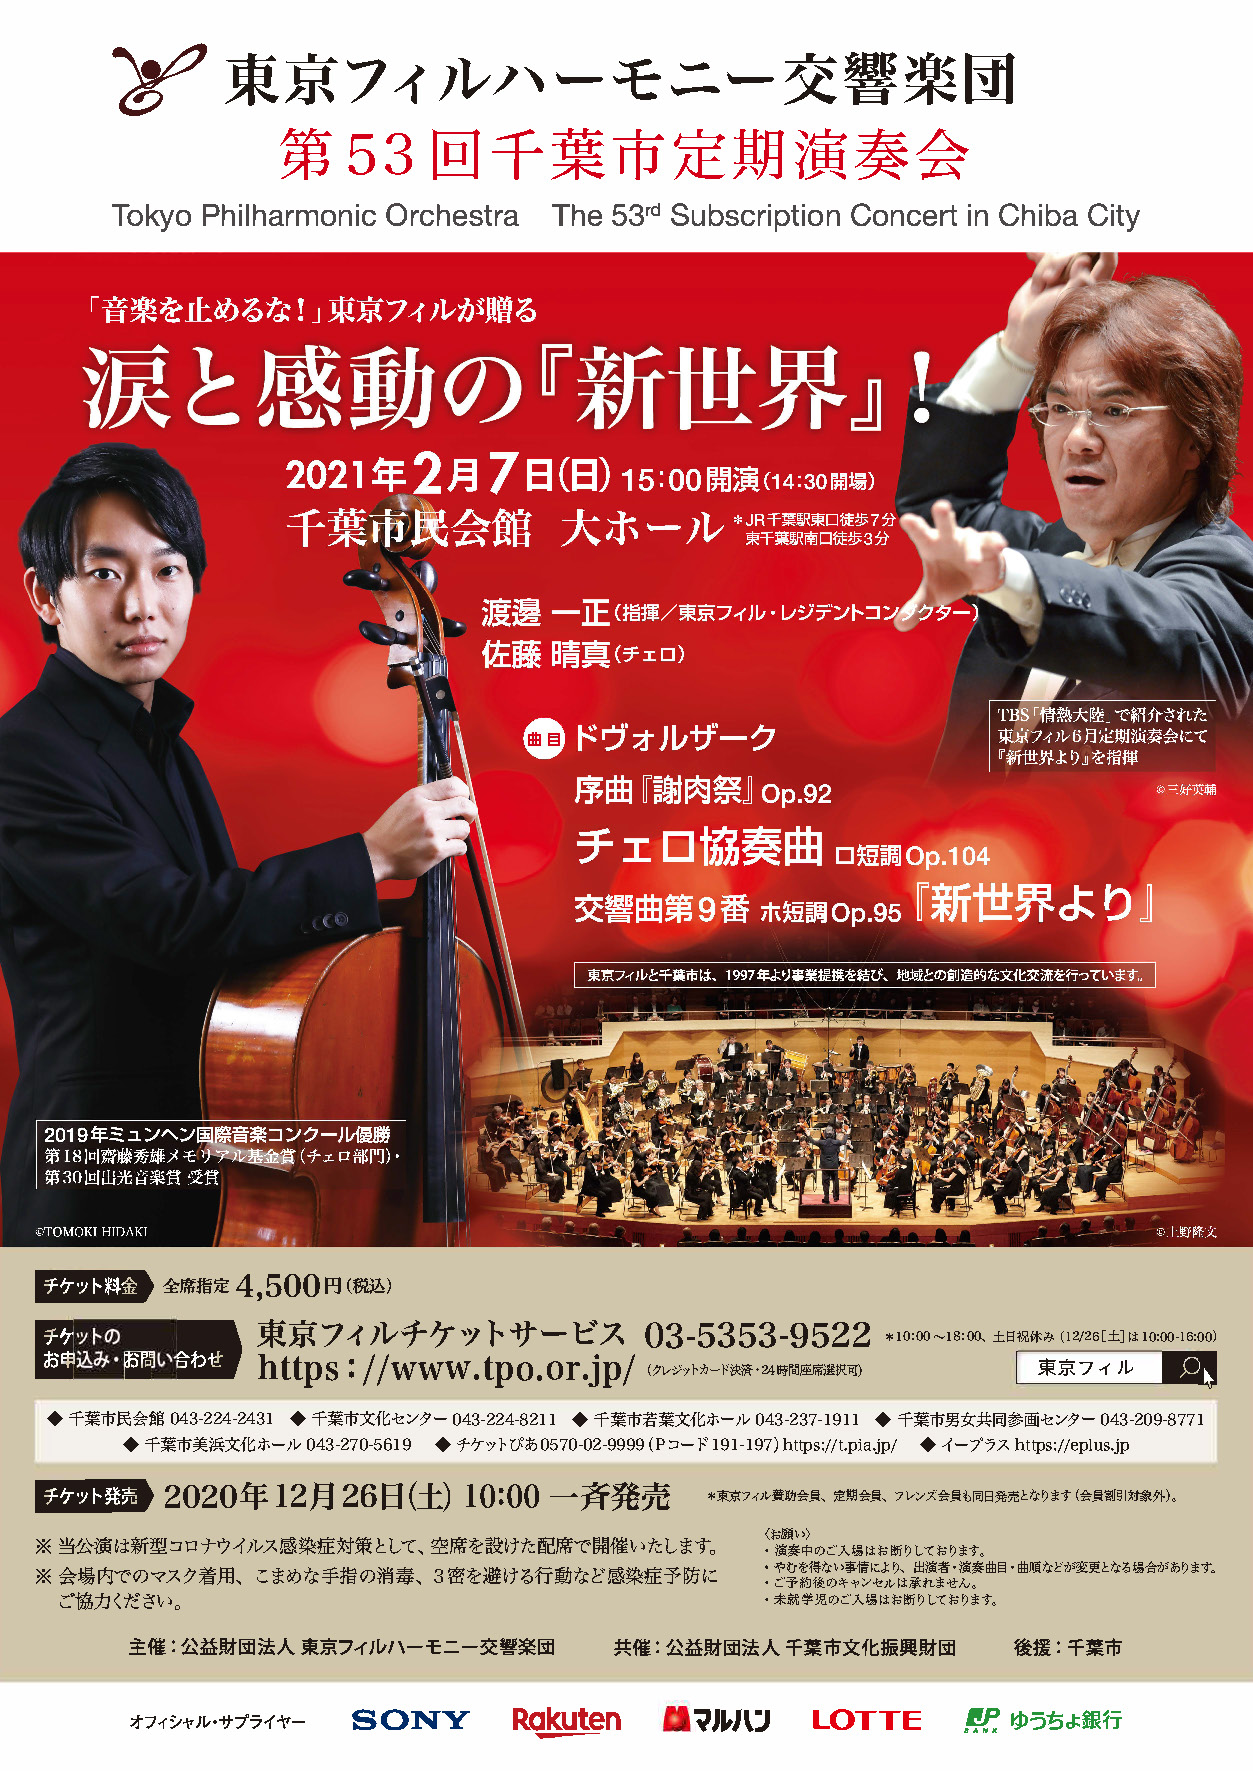 The 53rd Subscription Concert in Chiba City